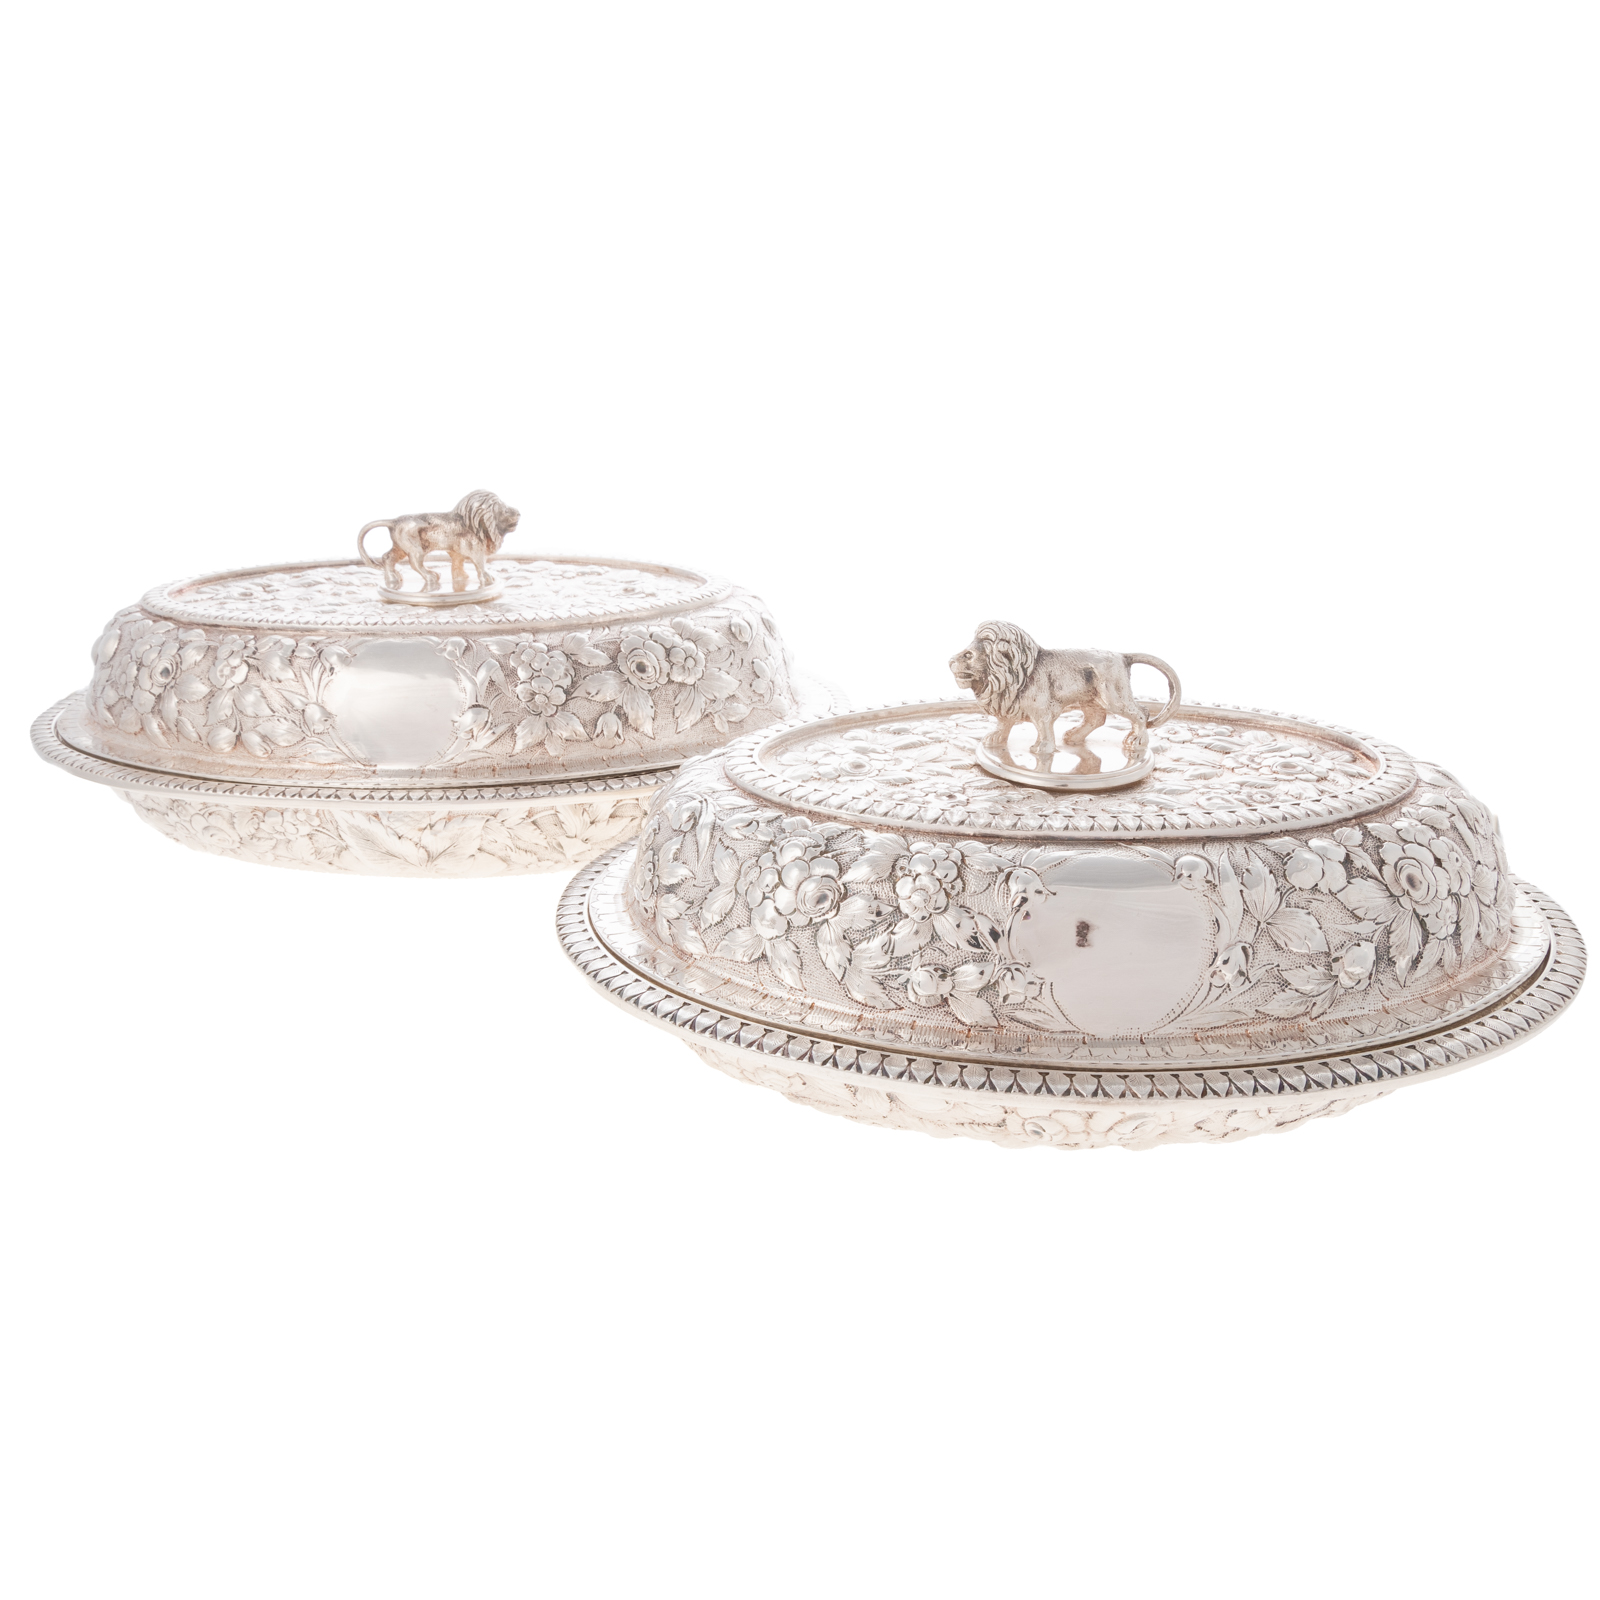 A PAIR OF SILVER PLATED REPOUSSE